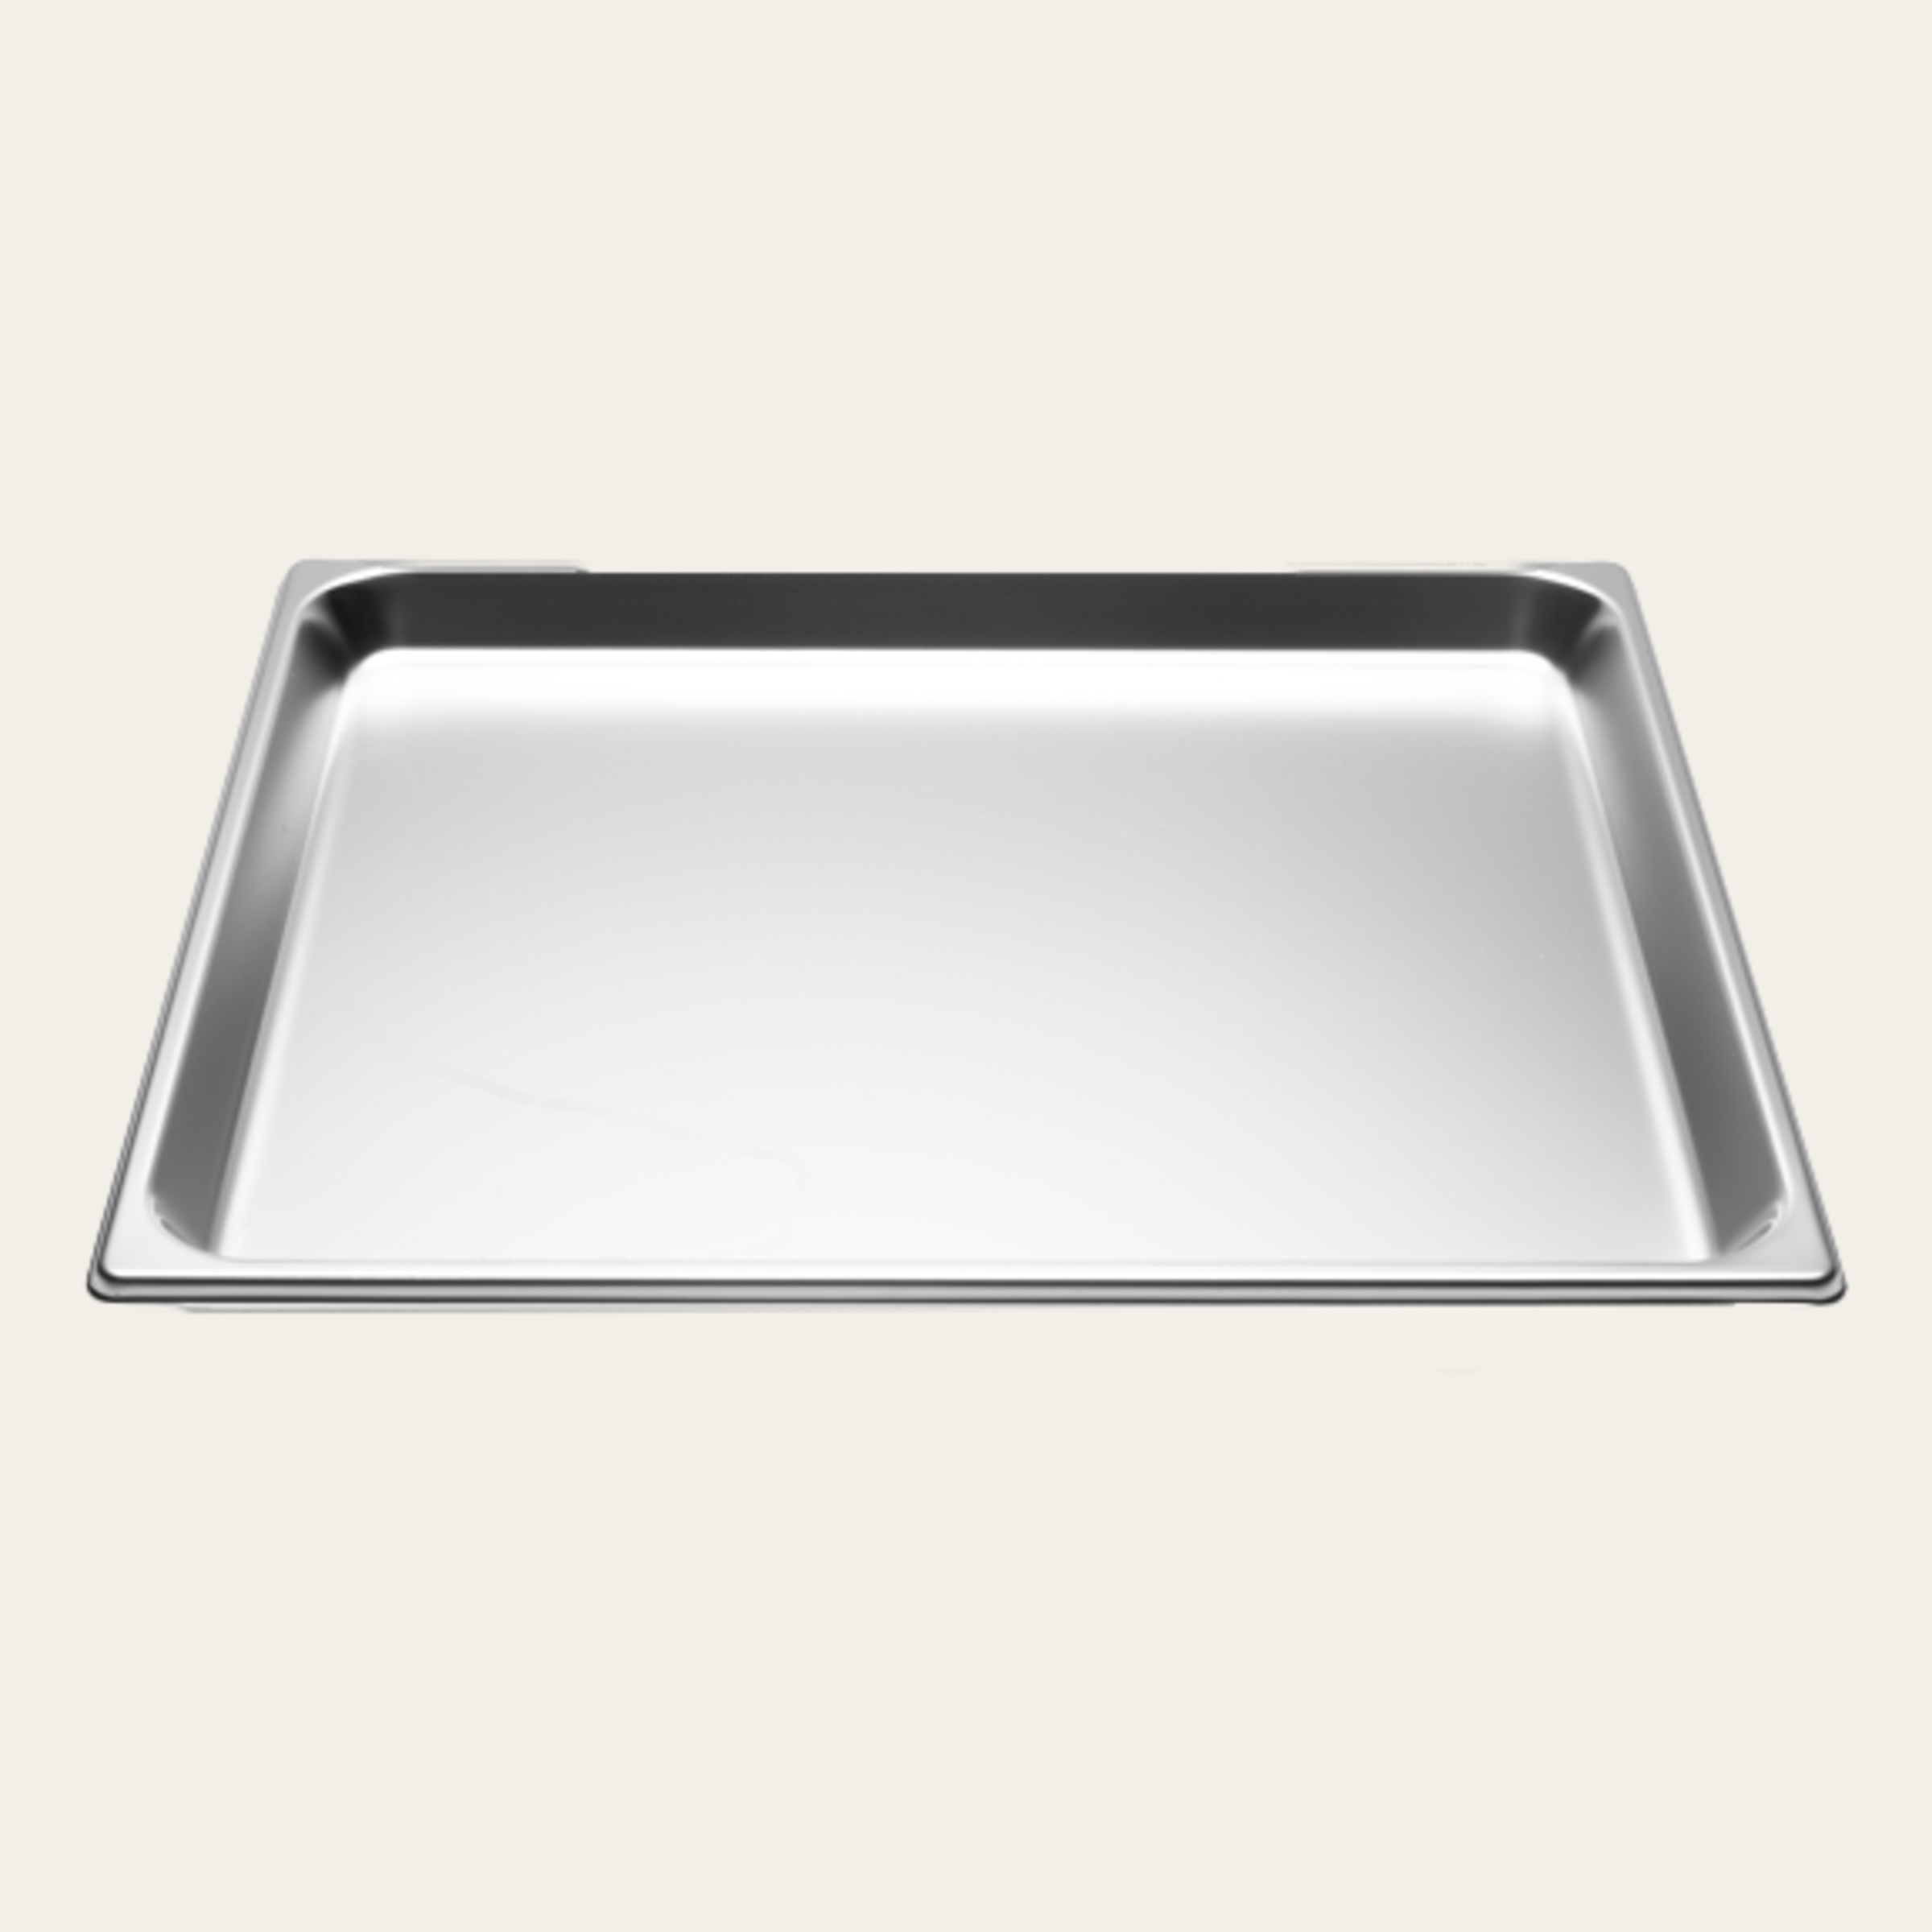 Stainless steel tray, 430 x 370 x 25mm